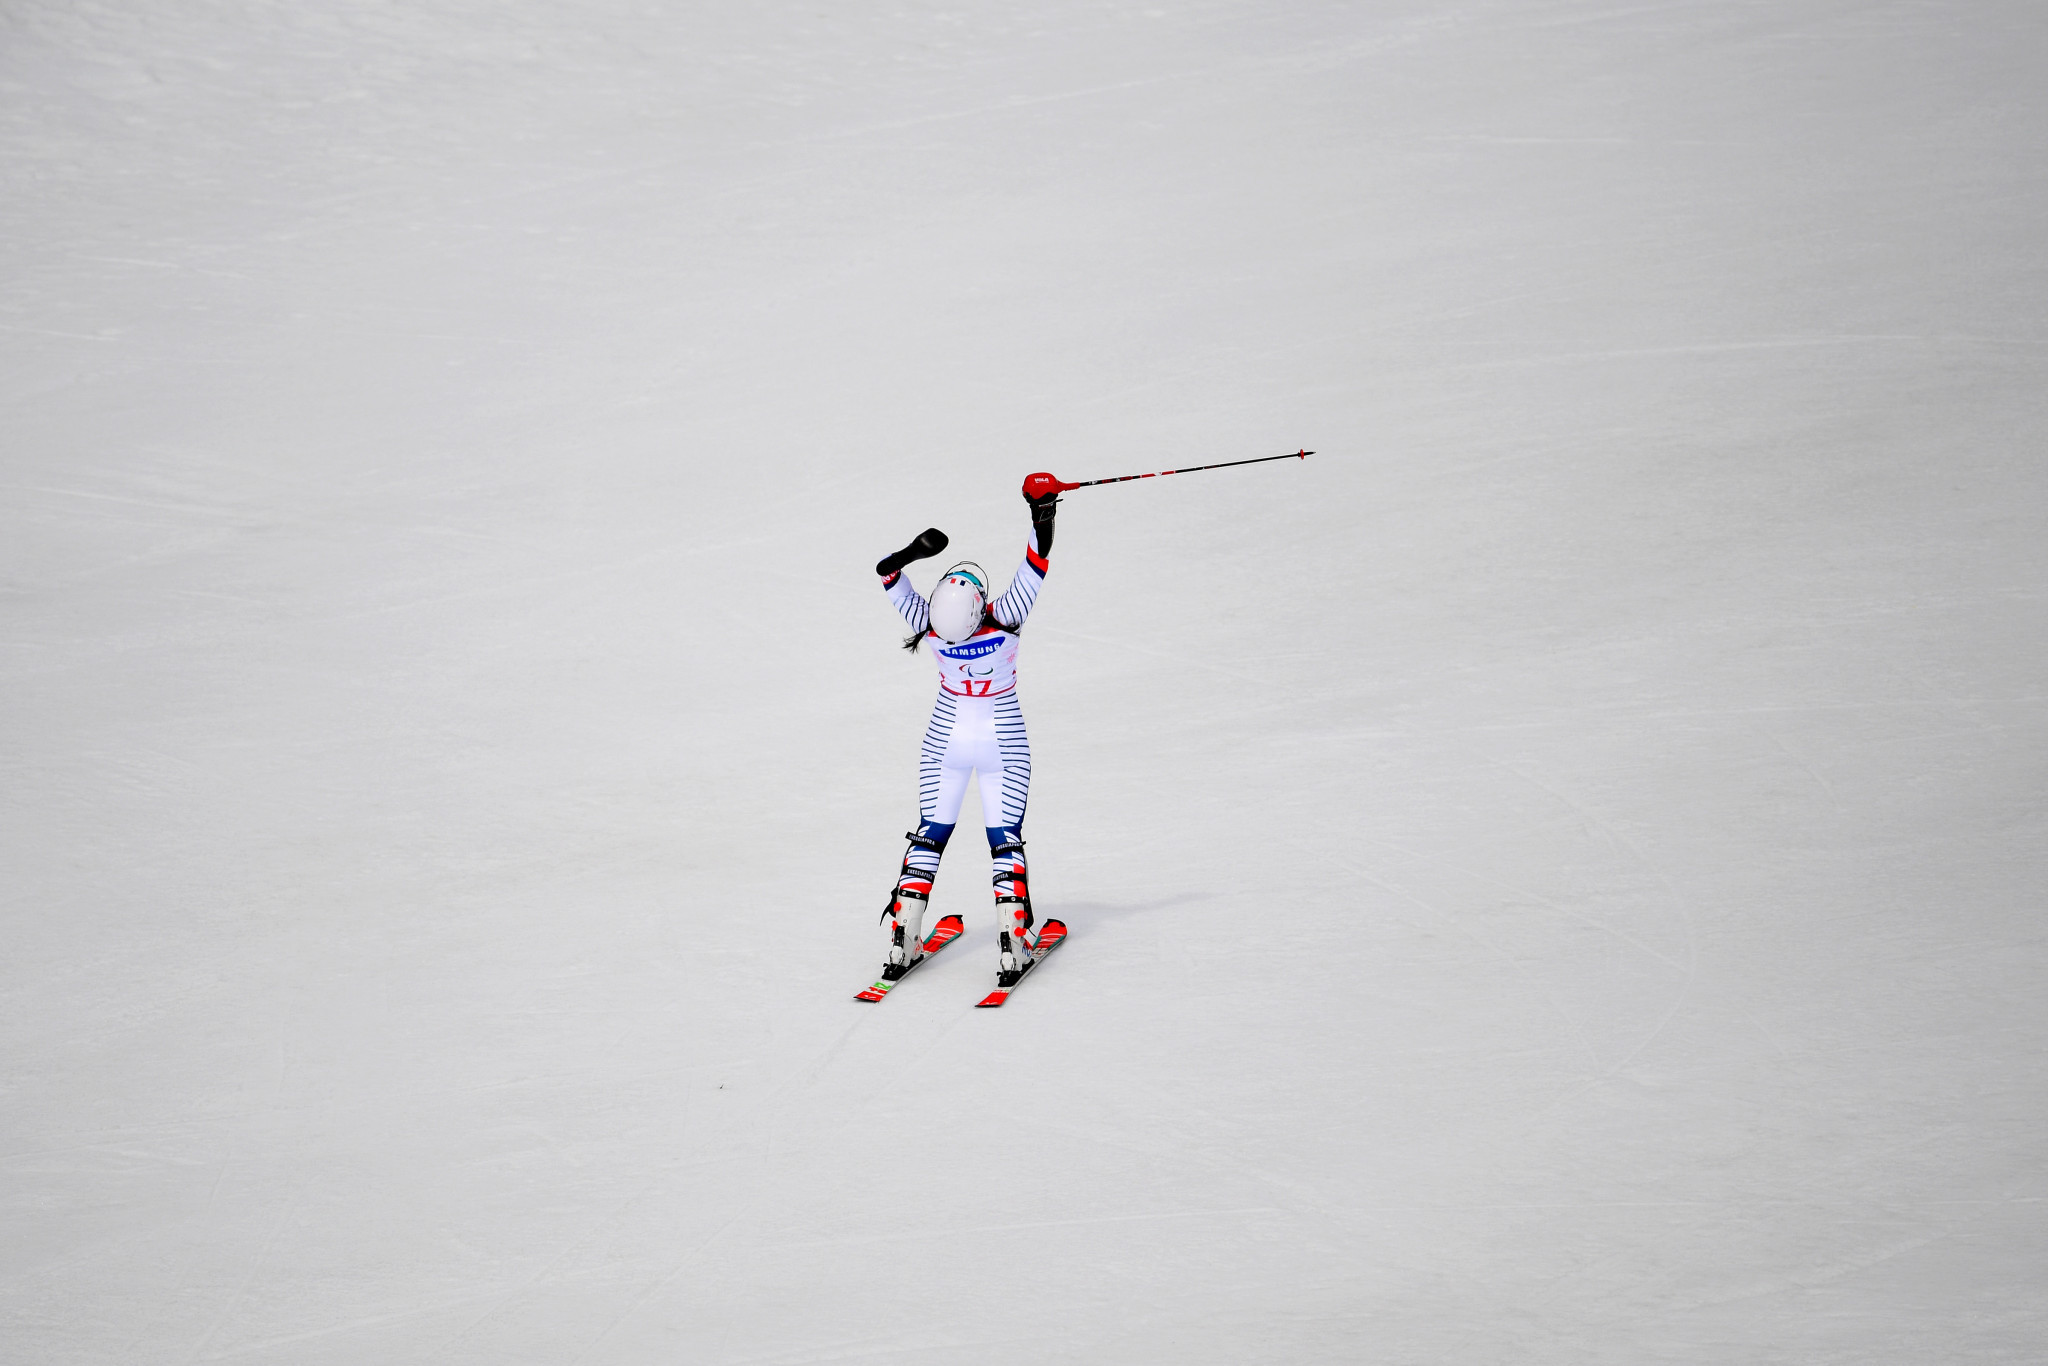 Marie Bochet of France secured her third gold medal at the event ©Getty Images